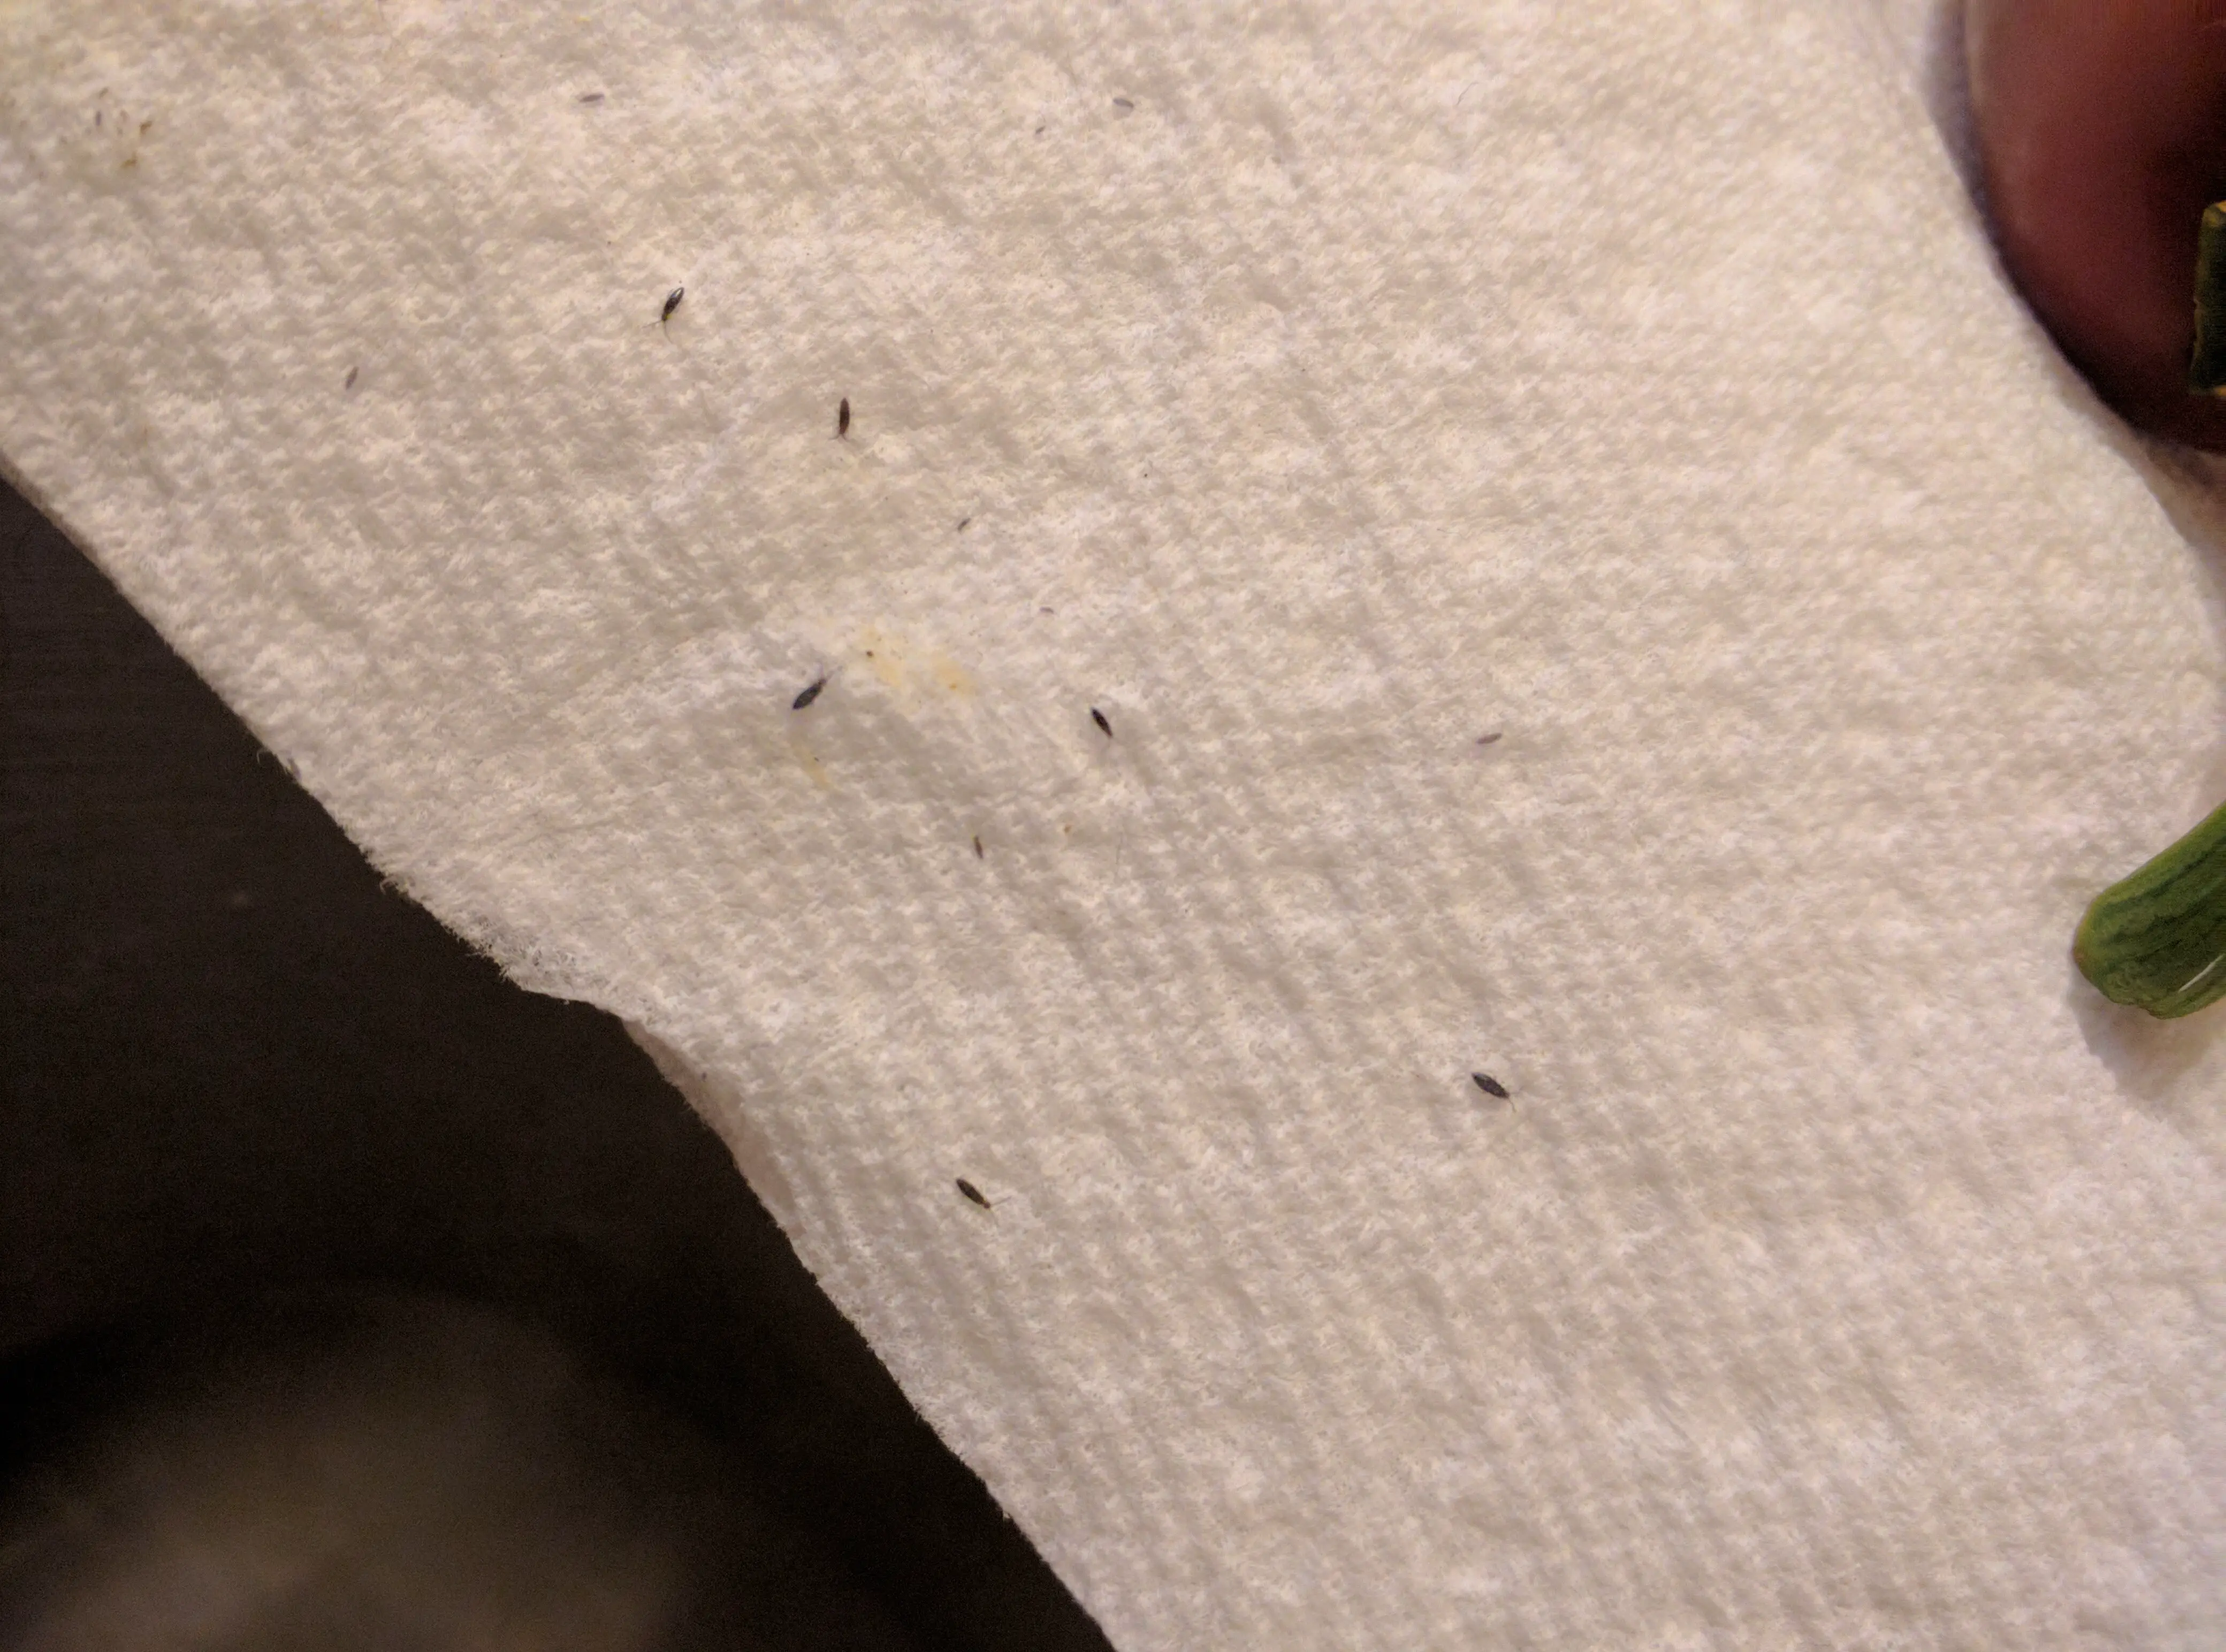 Tiny Black Bugs In Kitchen Pest Guide, Little Black Bugs In Kitchen Cabinets